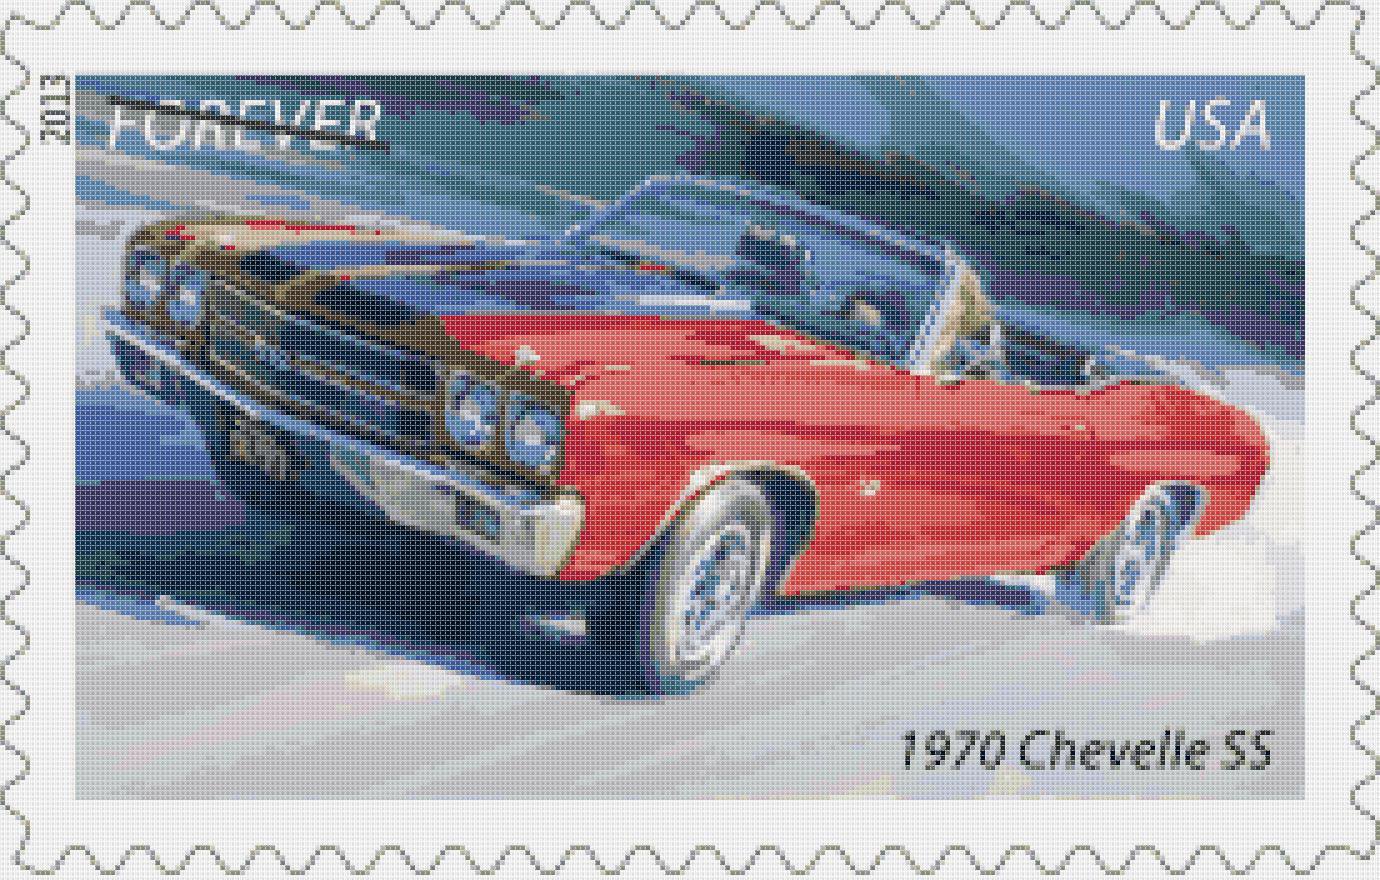 Counted Cross Stitch pattern muscle car chevelle SS 276 * 176 stitches E2074